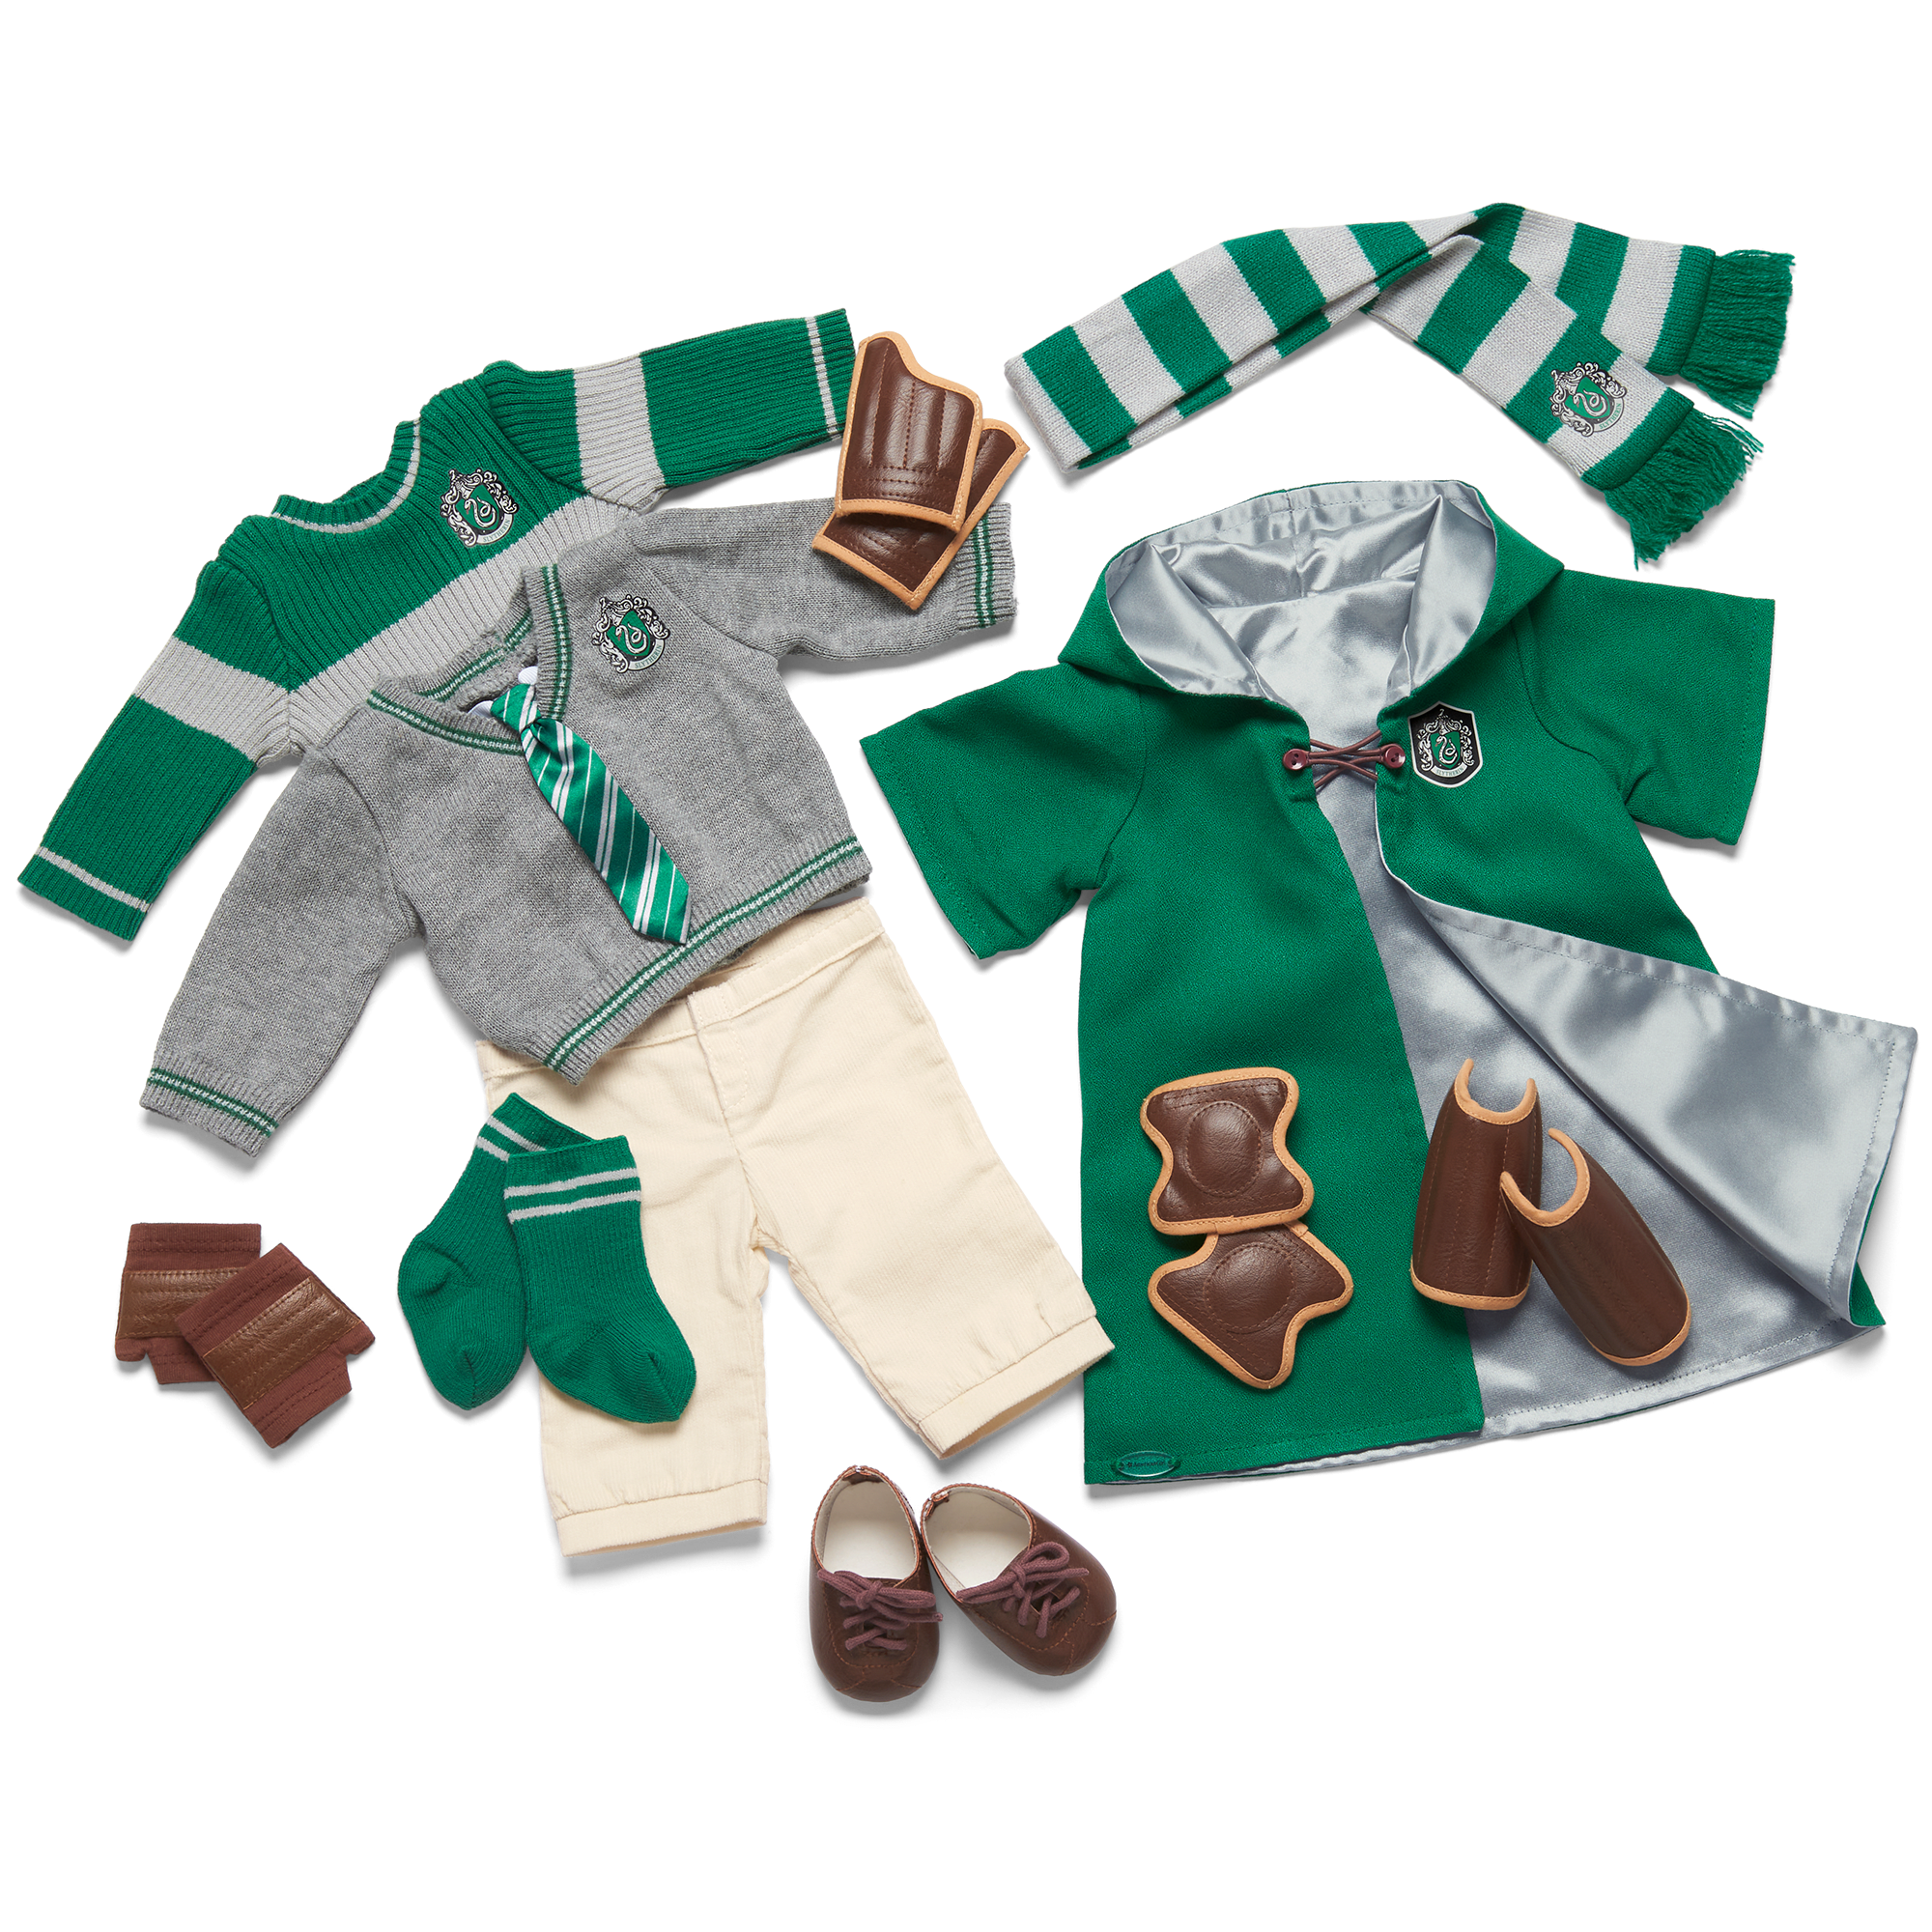 20+ Awesome Slytherin Gifts That'll Wow Slytherin of All Ages